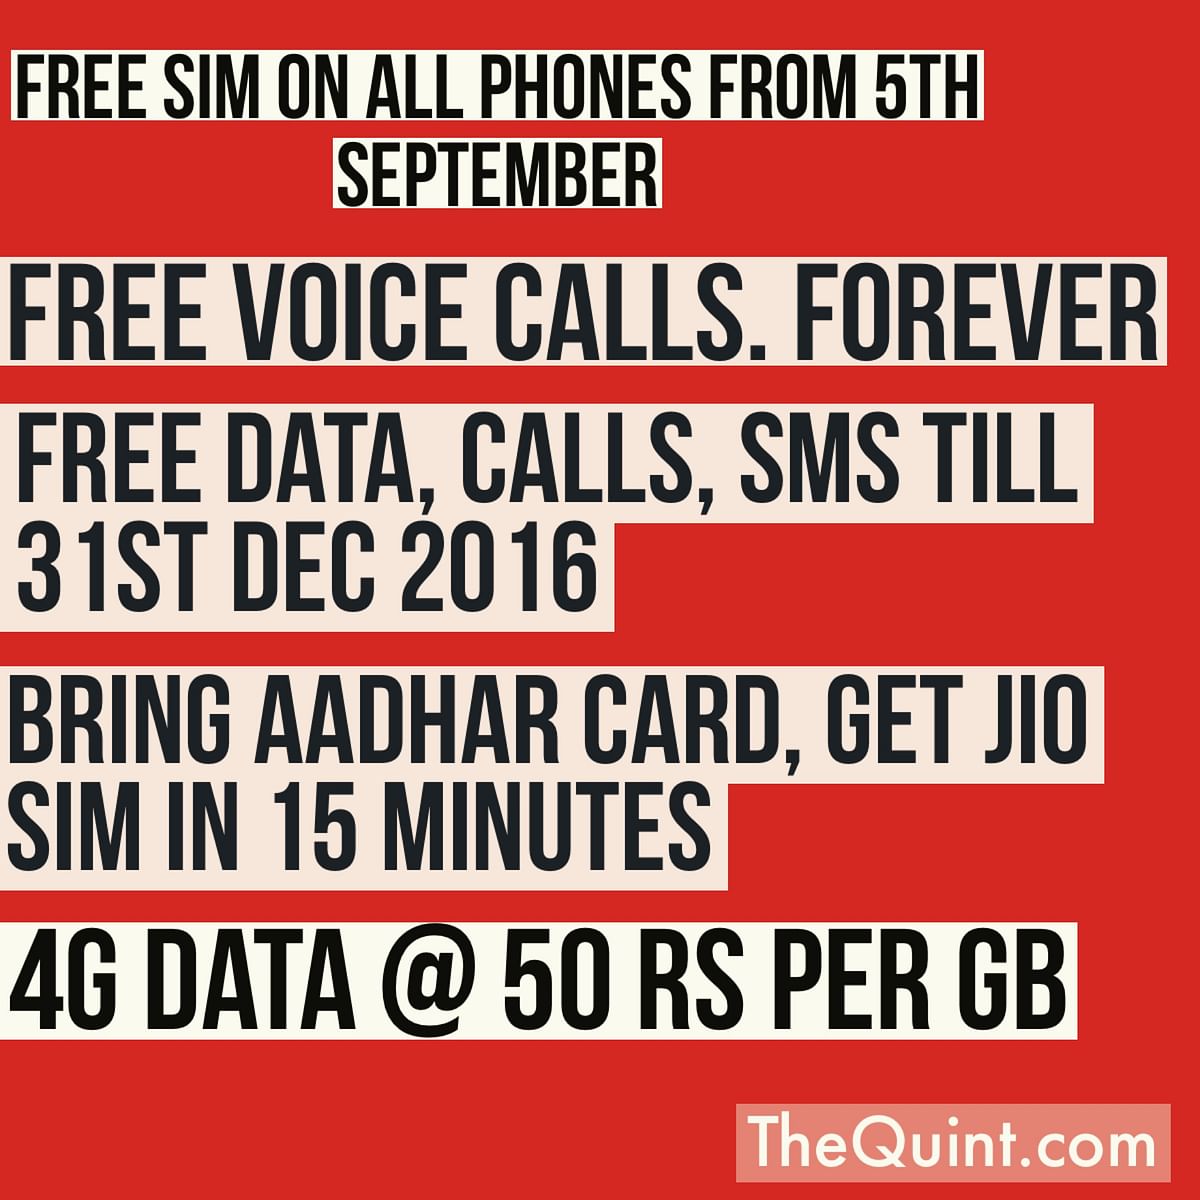 The telecom operator has finally announced its plans and promise of voice calls to everyone.